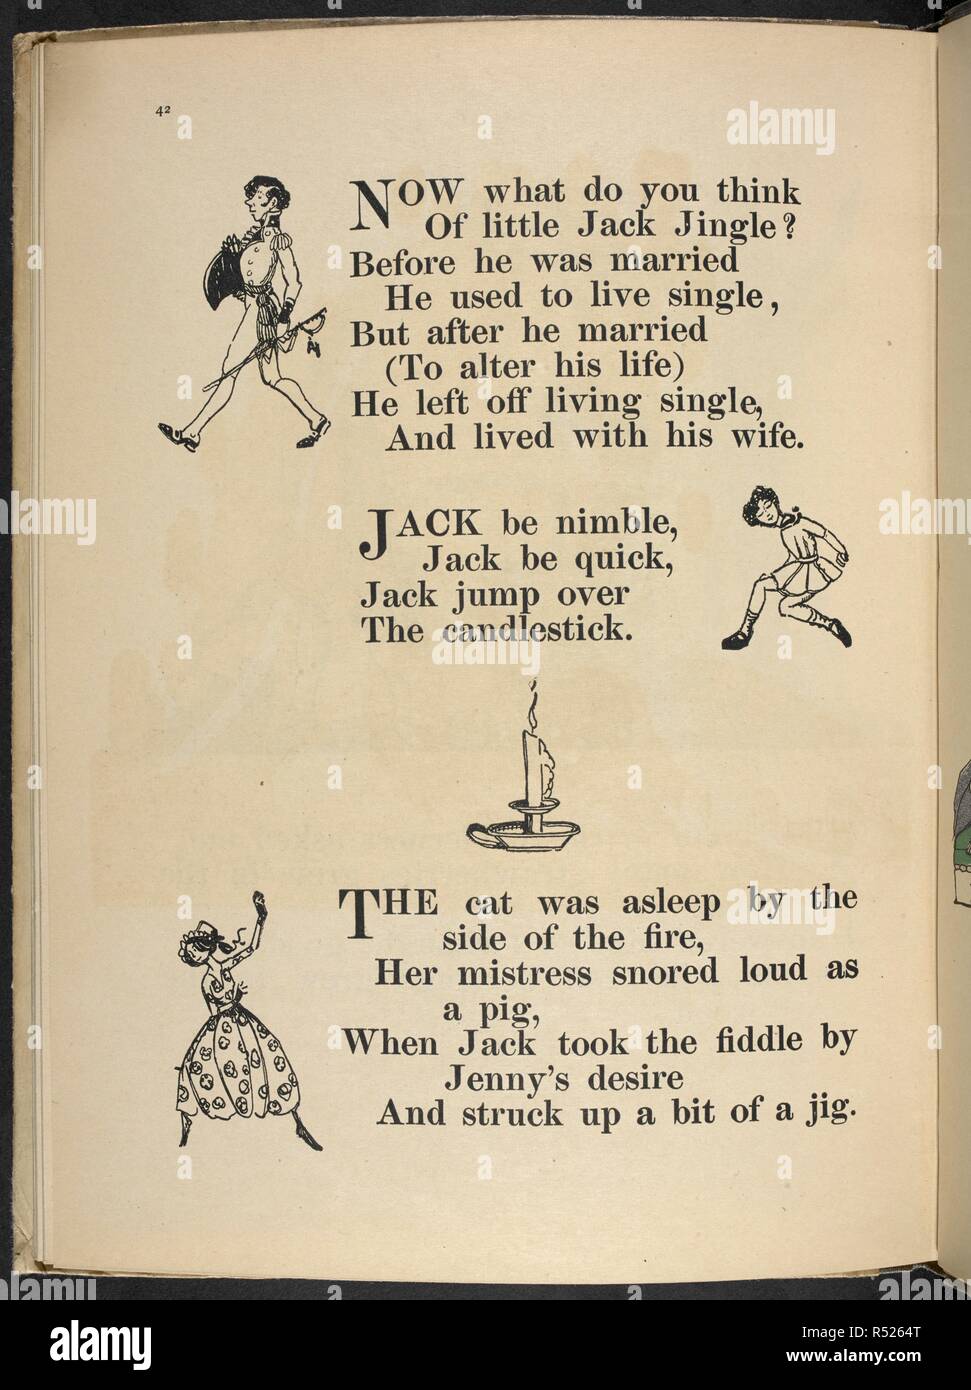 Now what do you think of little Jack Jingle?' Nursery Rhymes, with  pictures by C. L. Fraser. London : T. C. & E. C. Jack, [1919]. Source:  12800.ddd.31 page 42. Author: Fraser, Claud Lovat Stock Photo - Alamy